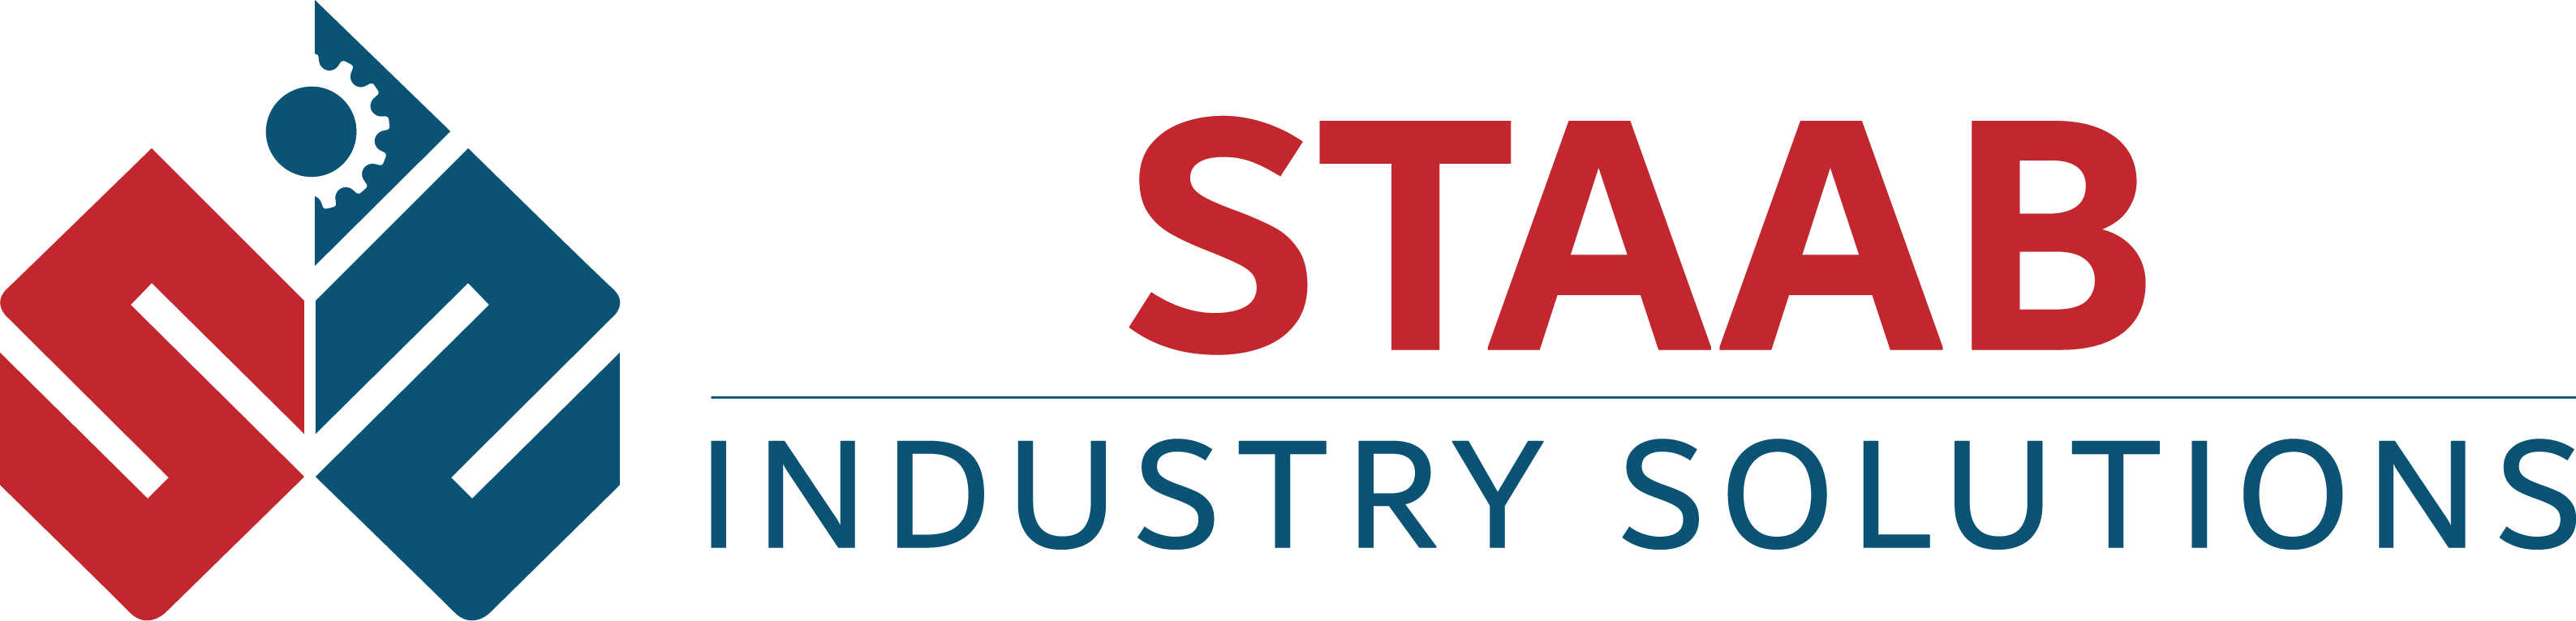 STAAB INDUSTRY SOLUTIONS